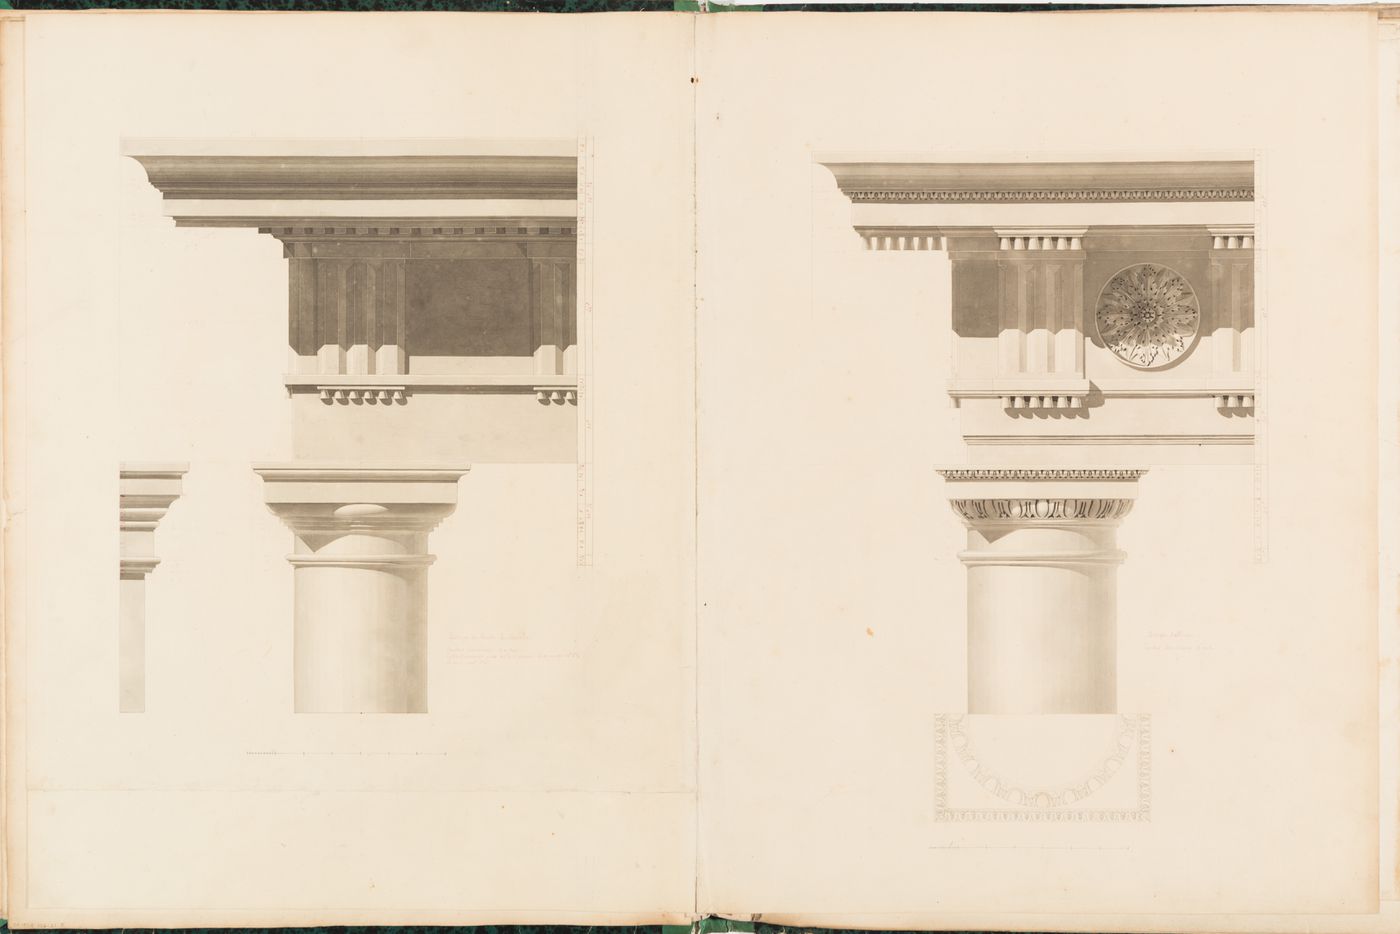 Elevations and profile of a Roman Doric column and entablature from the Theatre of Marcellus, Rome, and an elevation of a Roman Doric column and entablature from a building in Albano